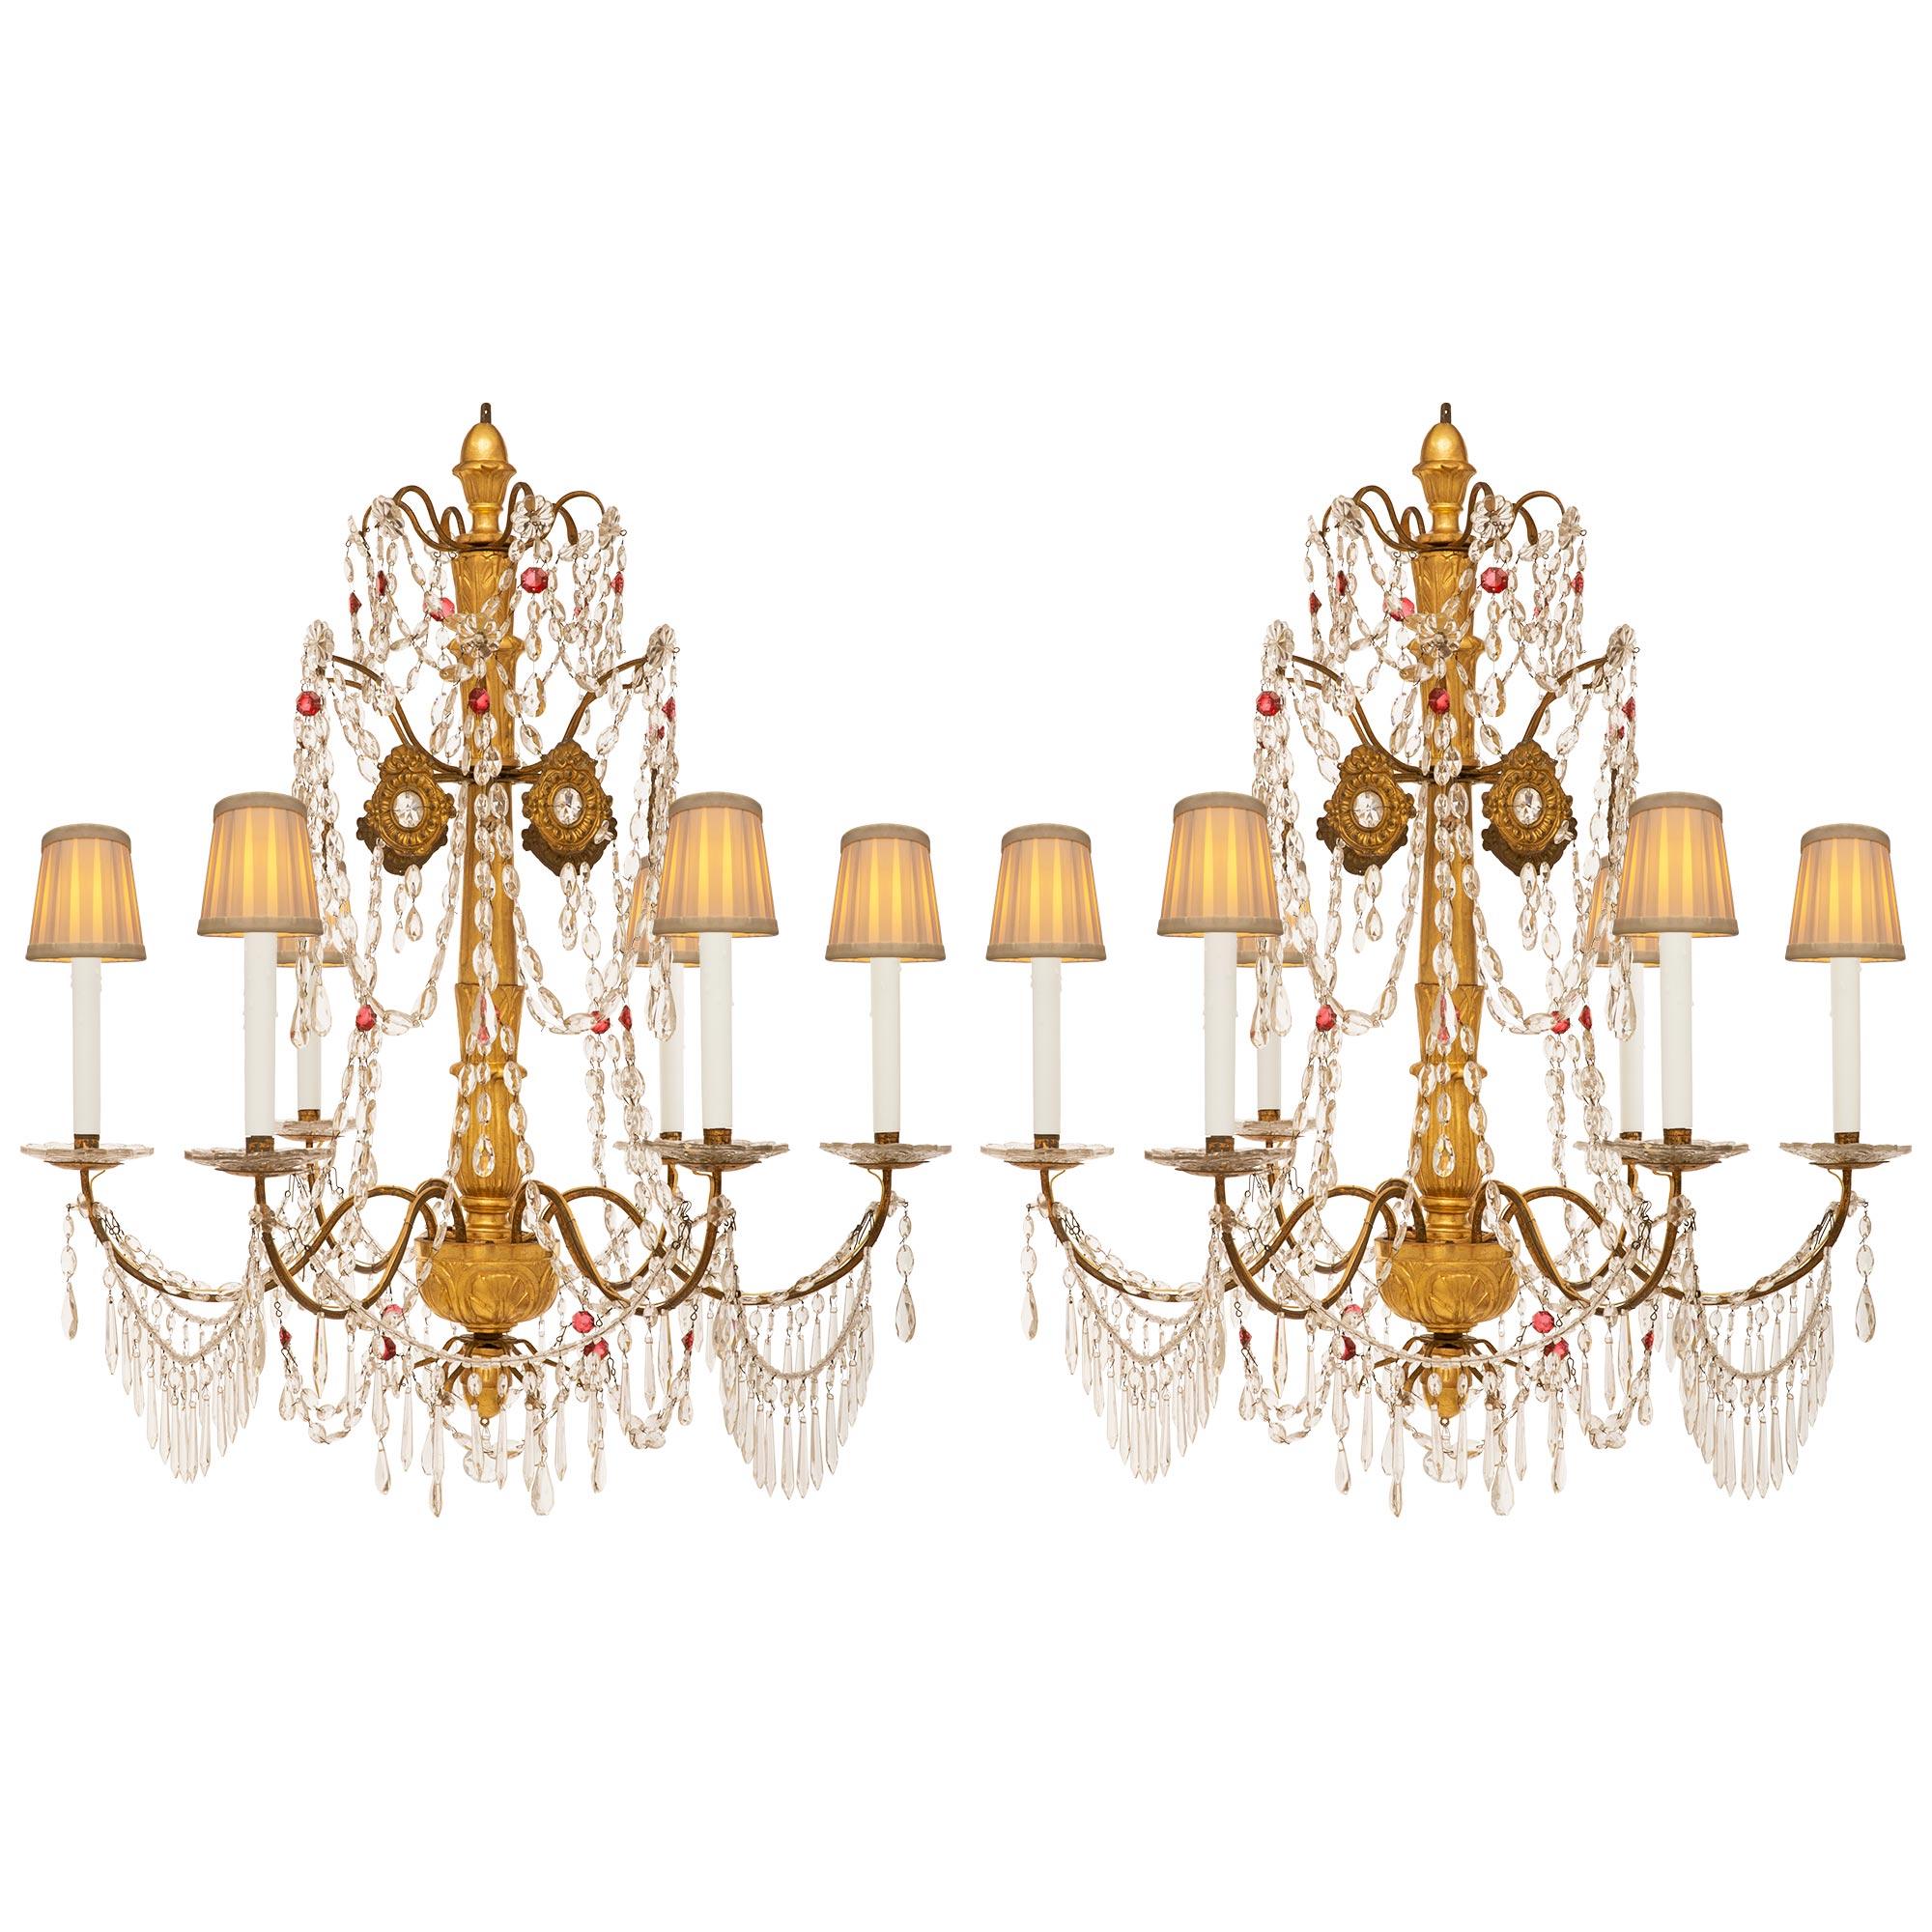 Pair Of Italian 18th c. Genovese St. Giltwood, Glass, Iron & Crystal Chandeliers For Sale